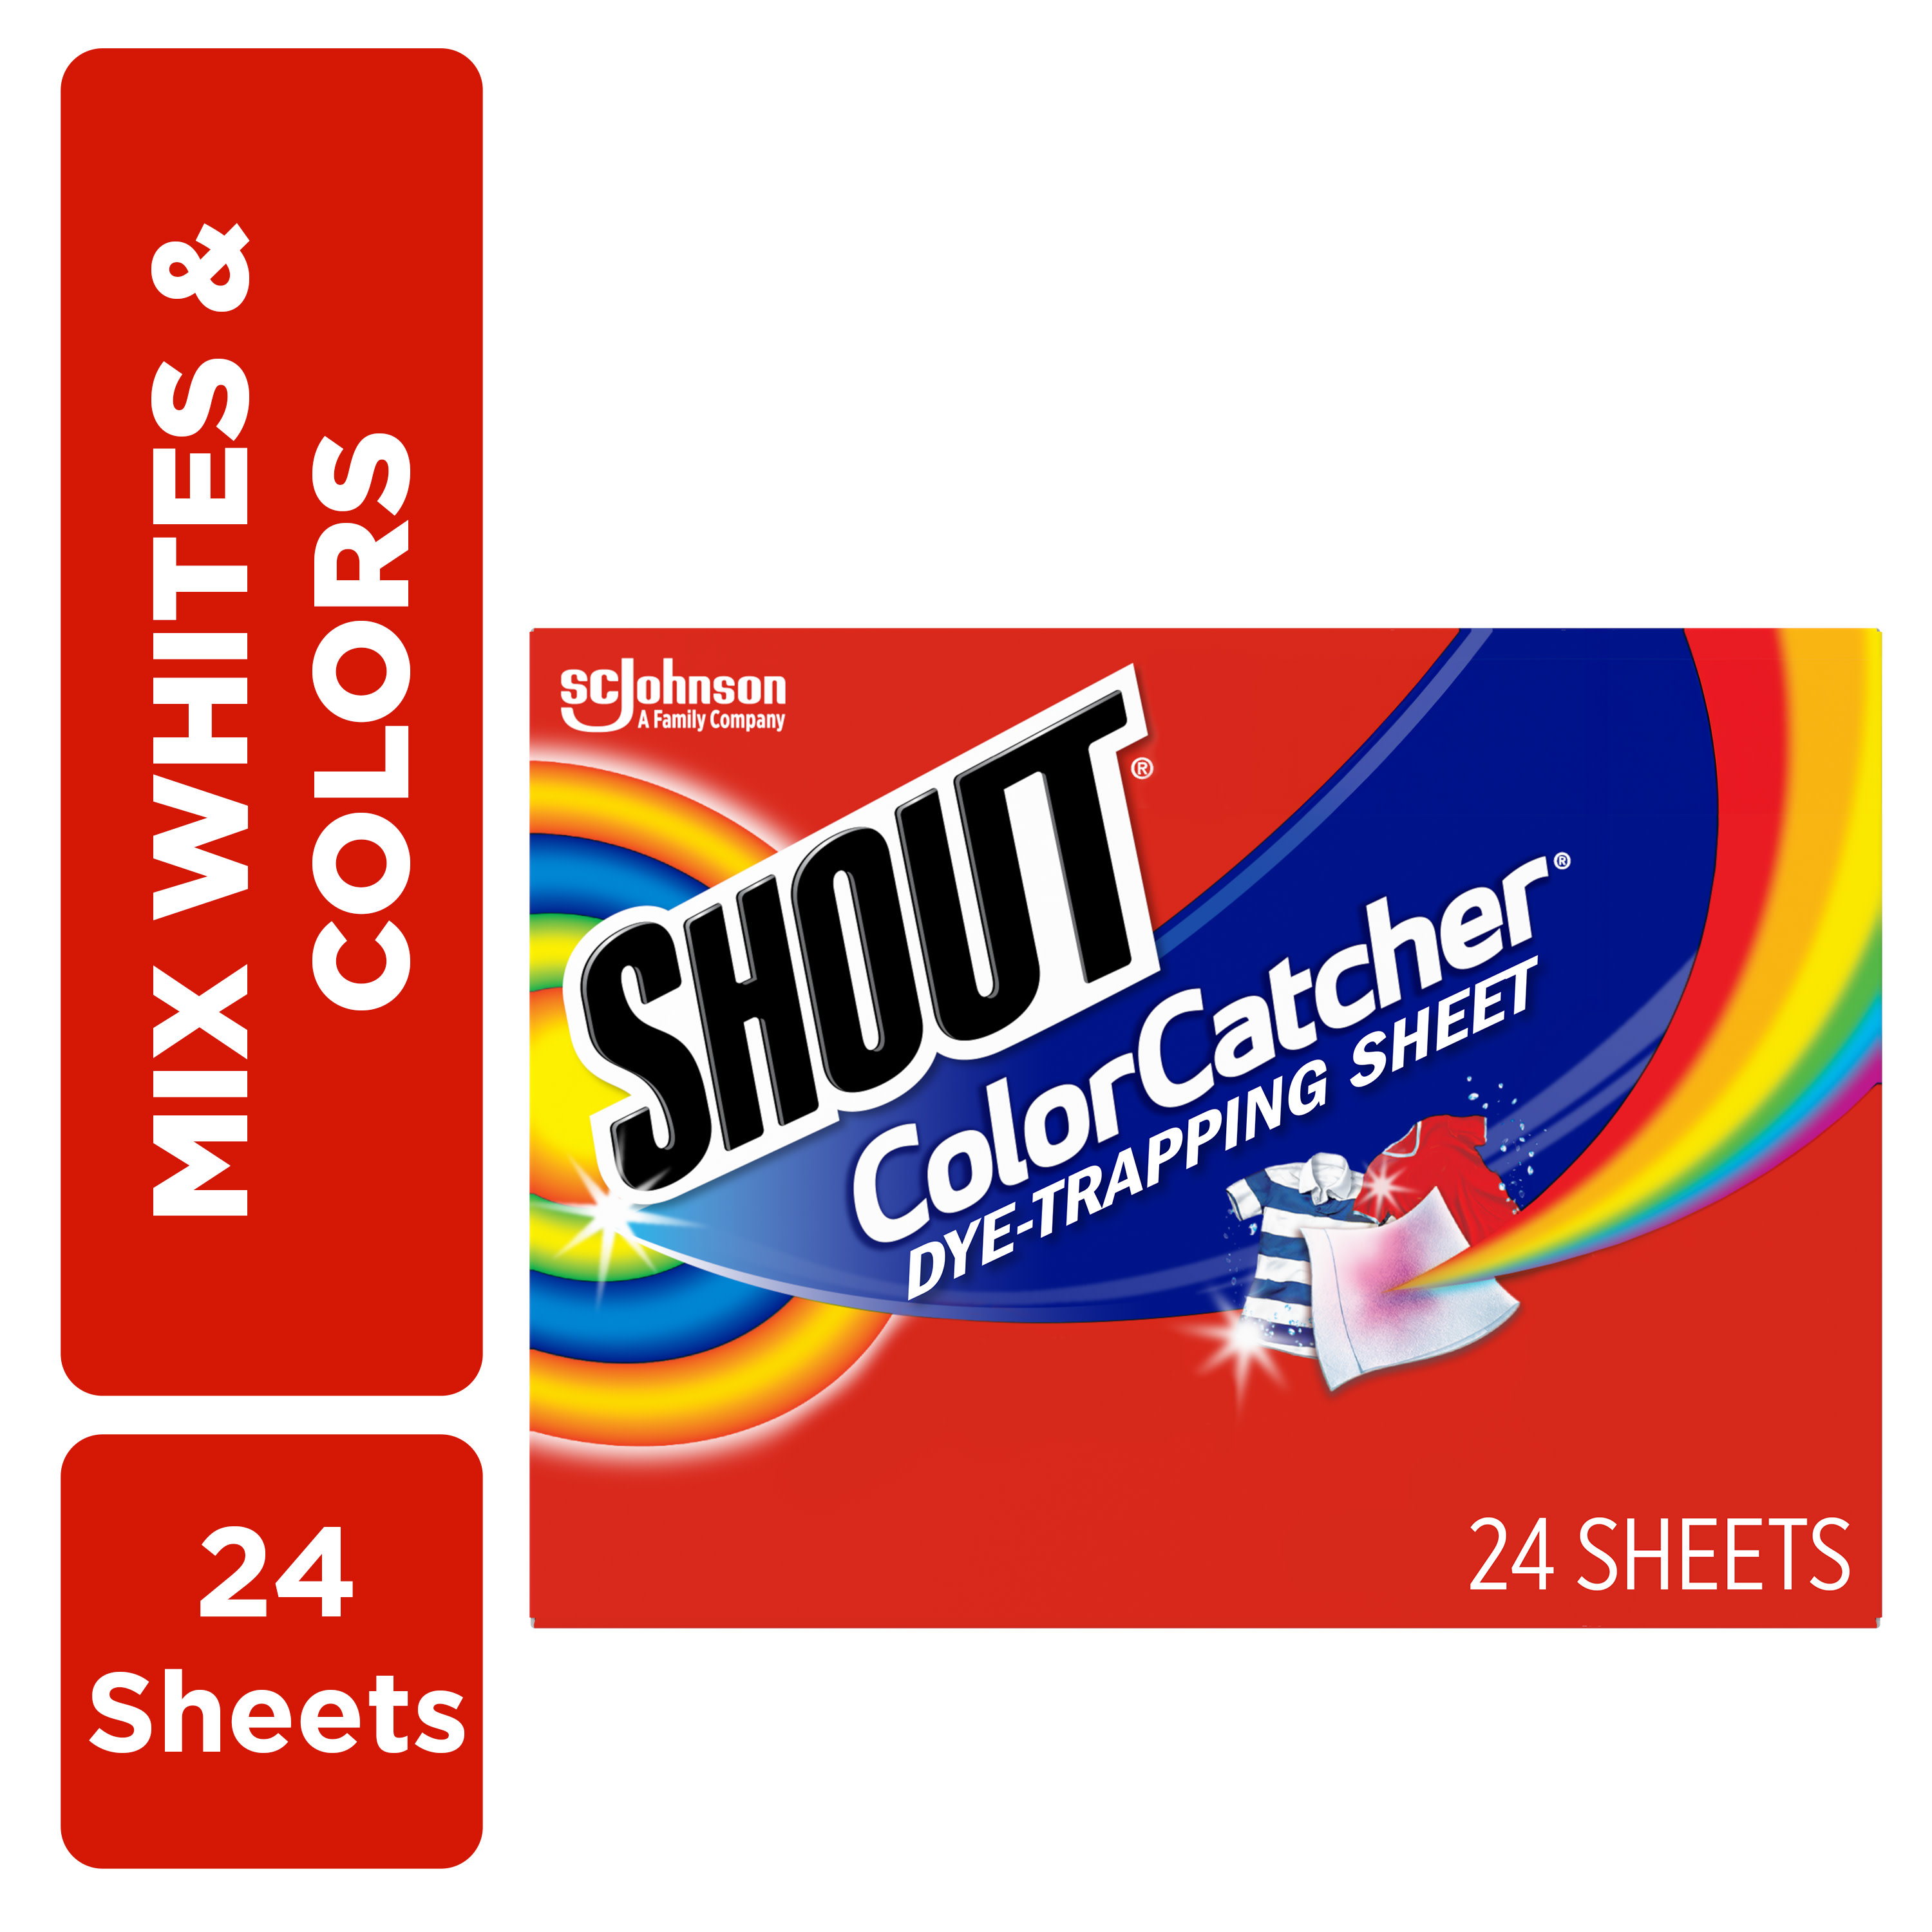 Shout Color Catcher,&nbsp;Laundry&nbsp;Dye-Trapping Sheets, 24 Sheets - image 1 of 13